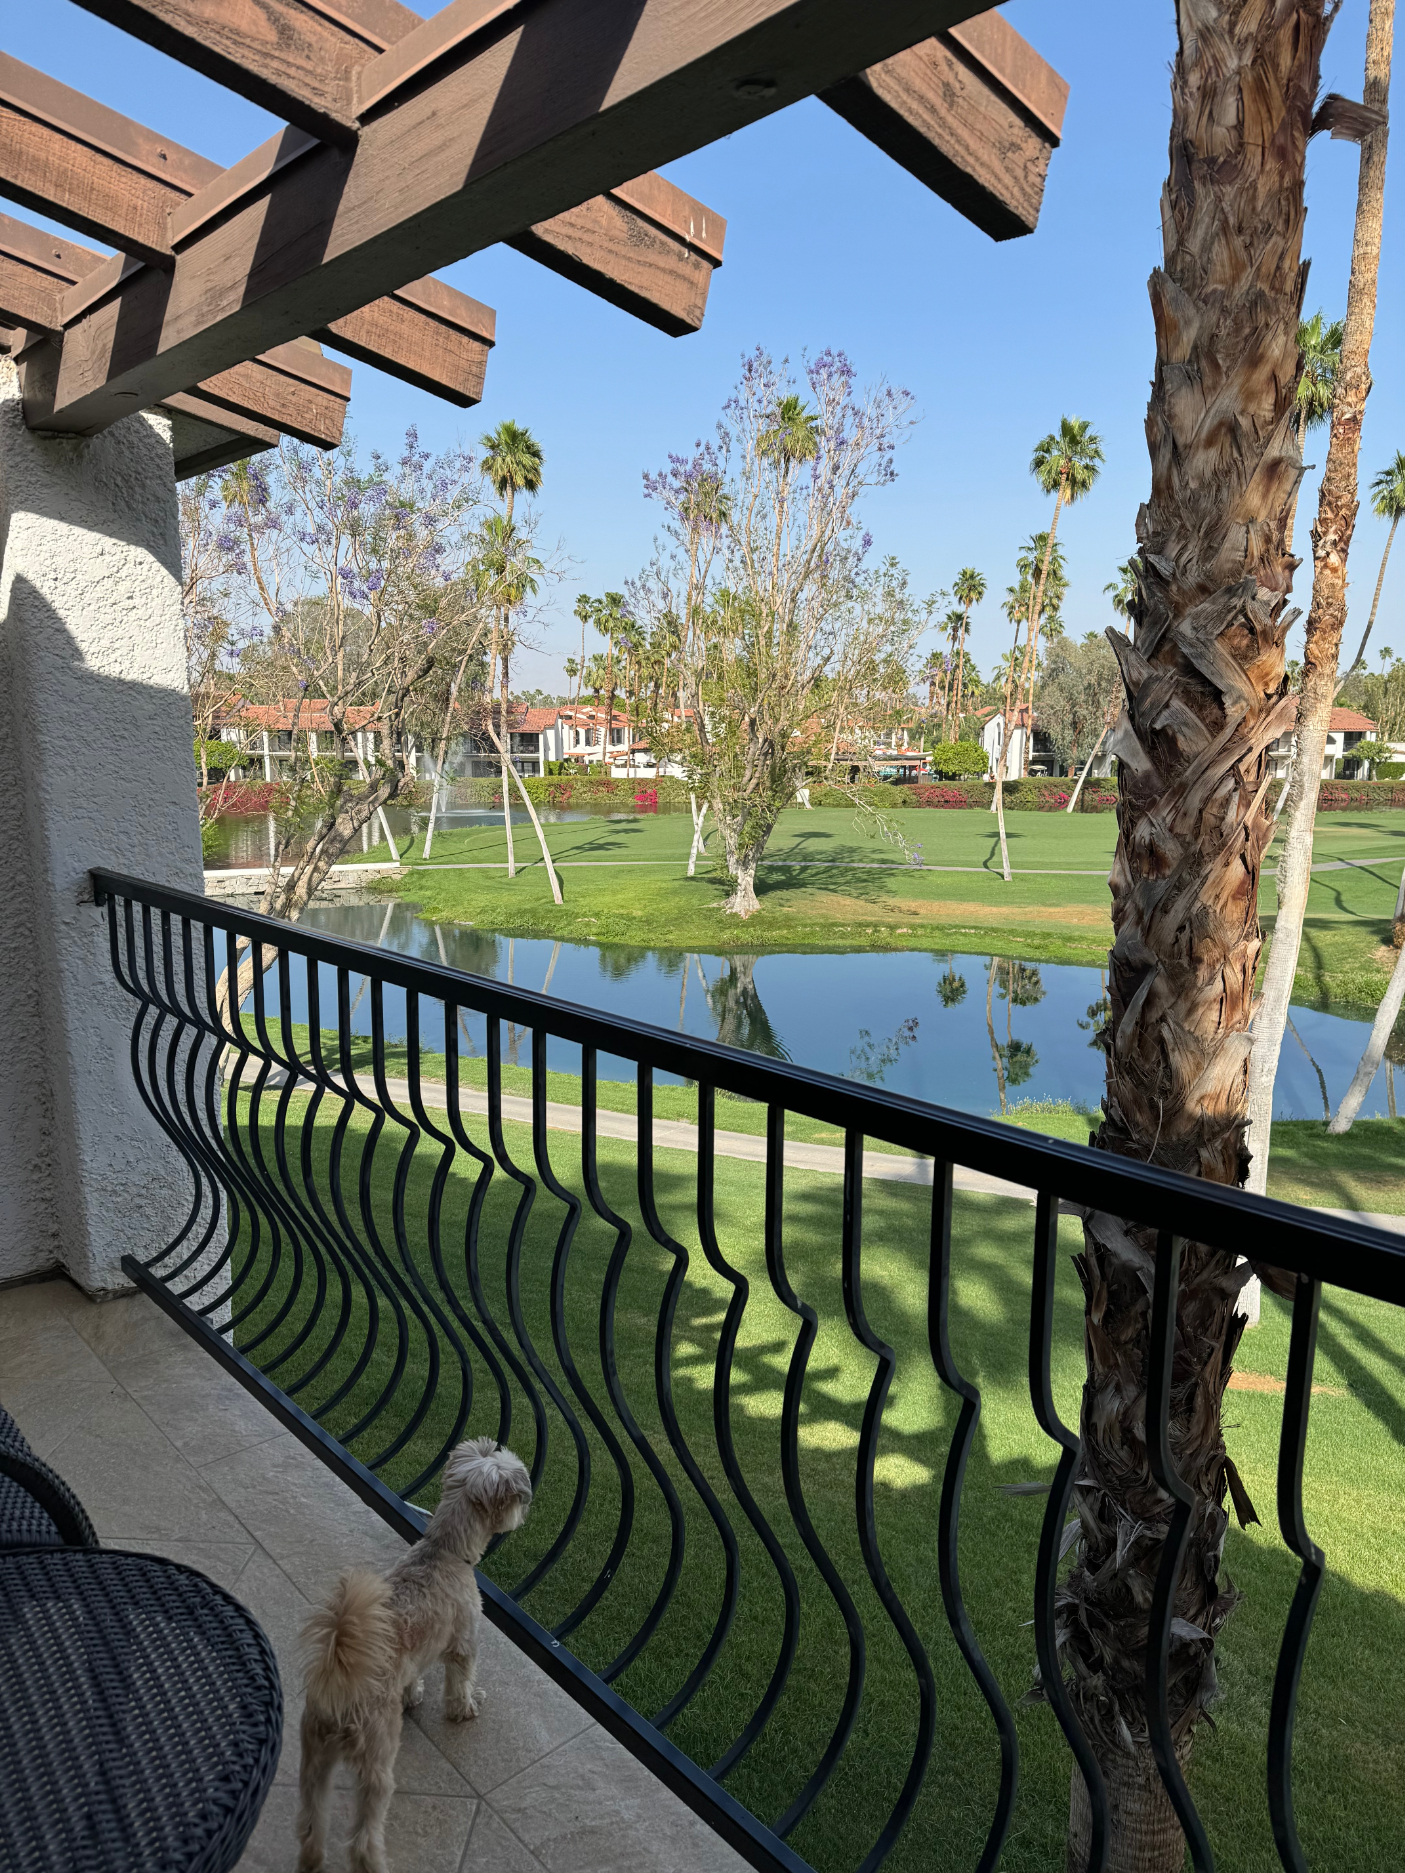 Dog on a balcony overlooking a golf course with palm trees and a person in the distance